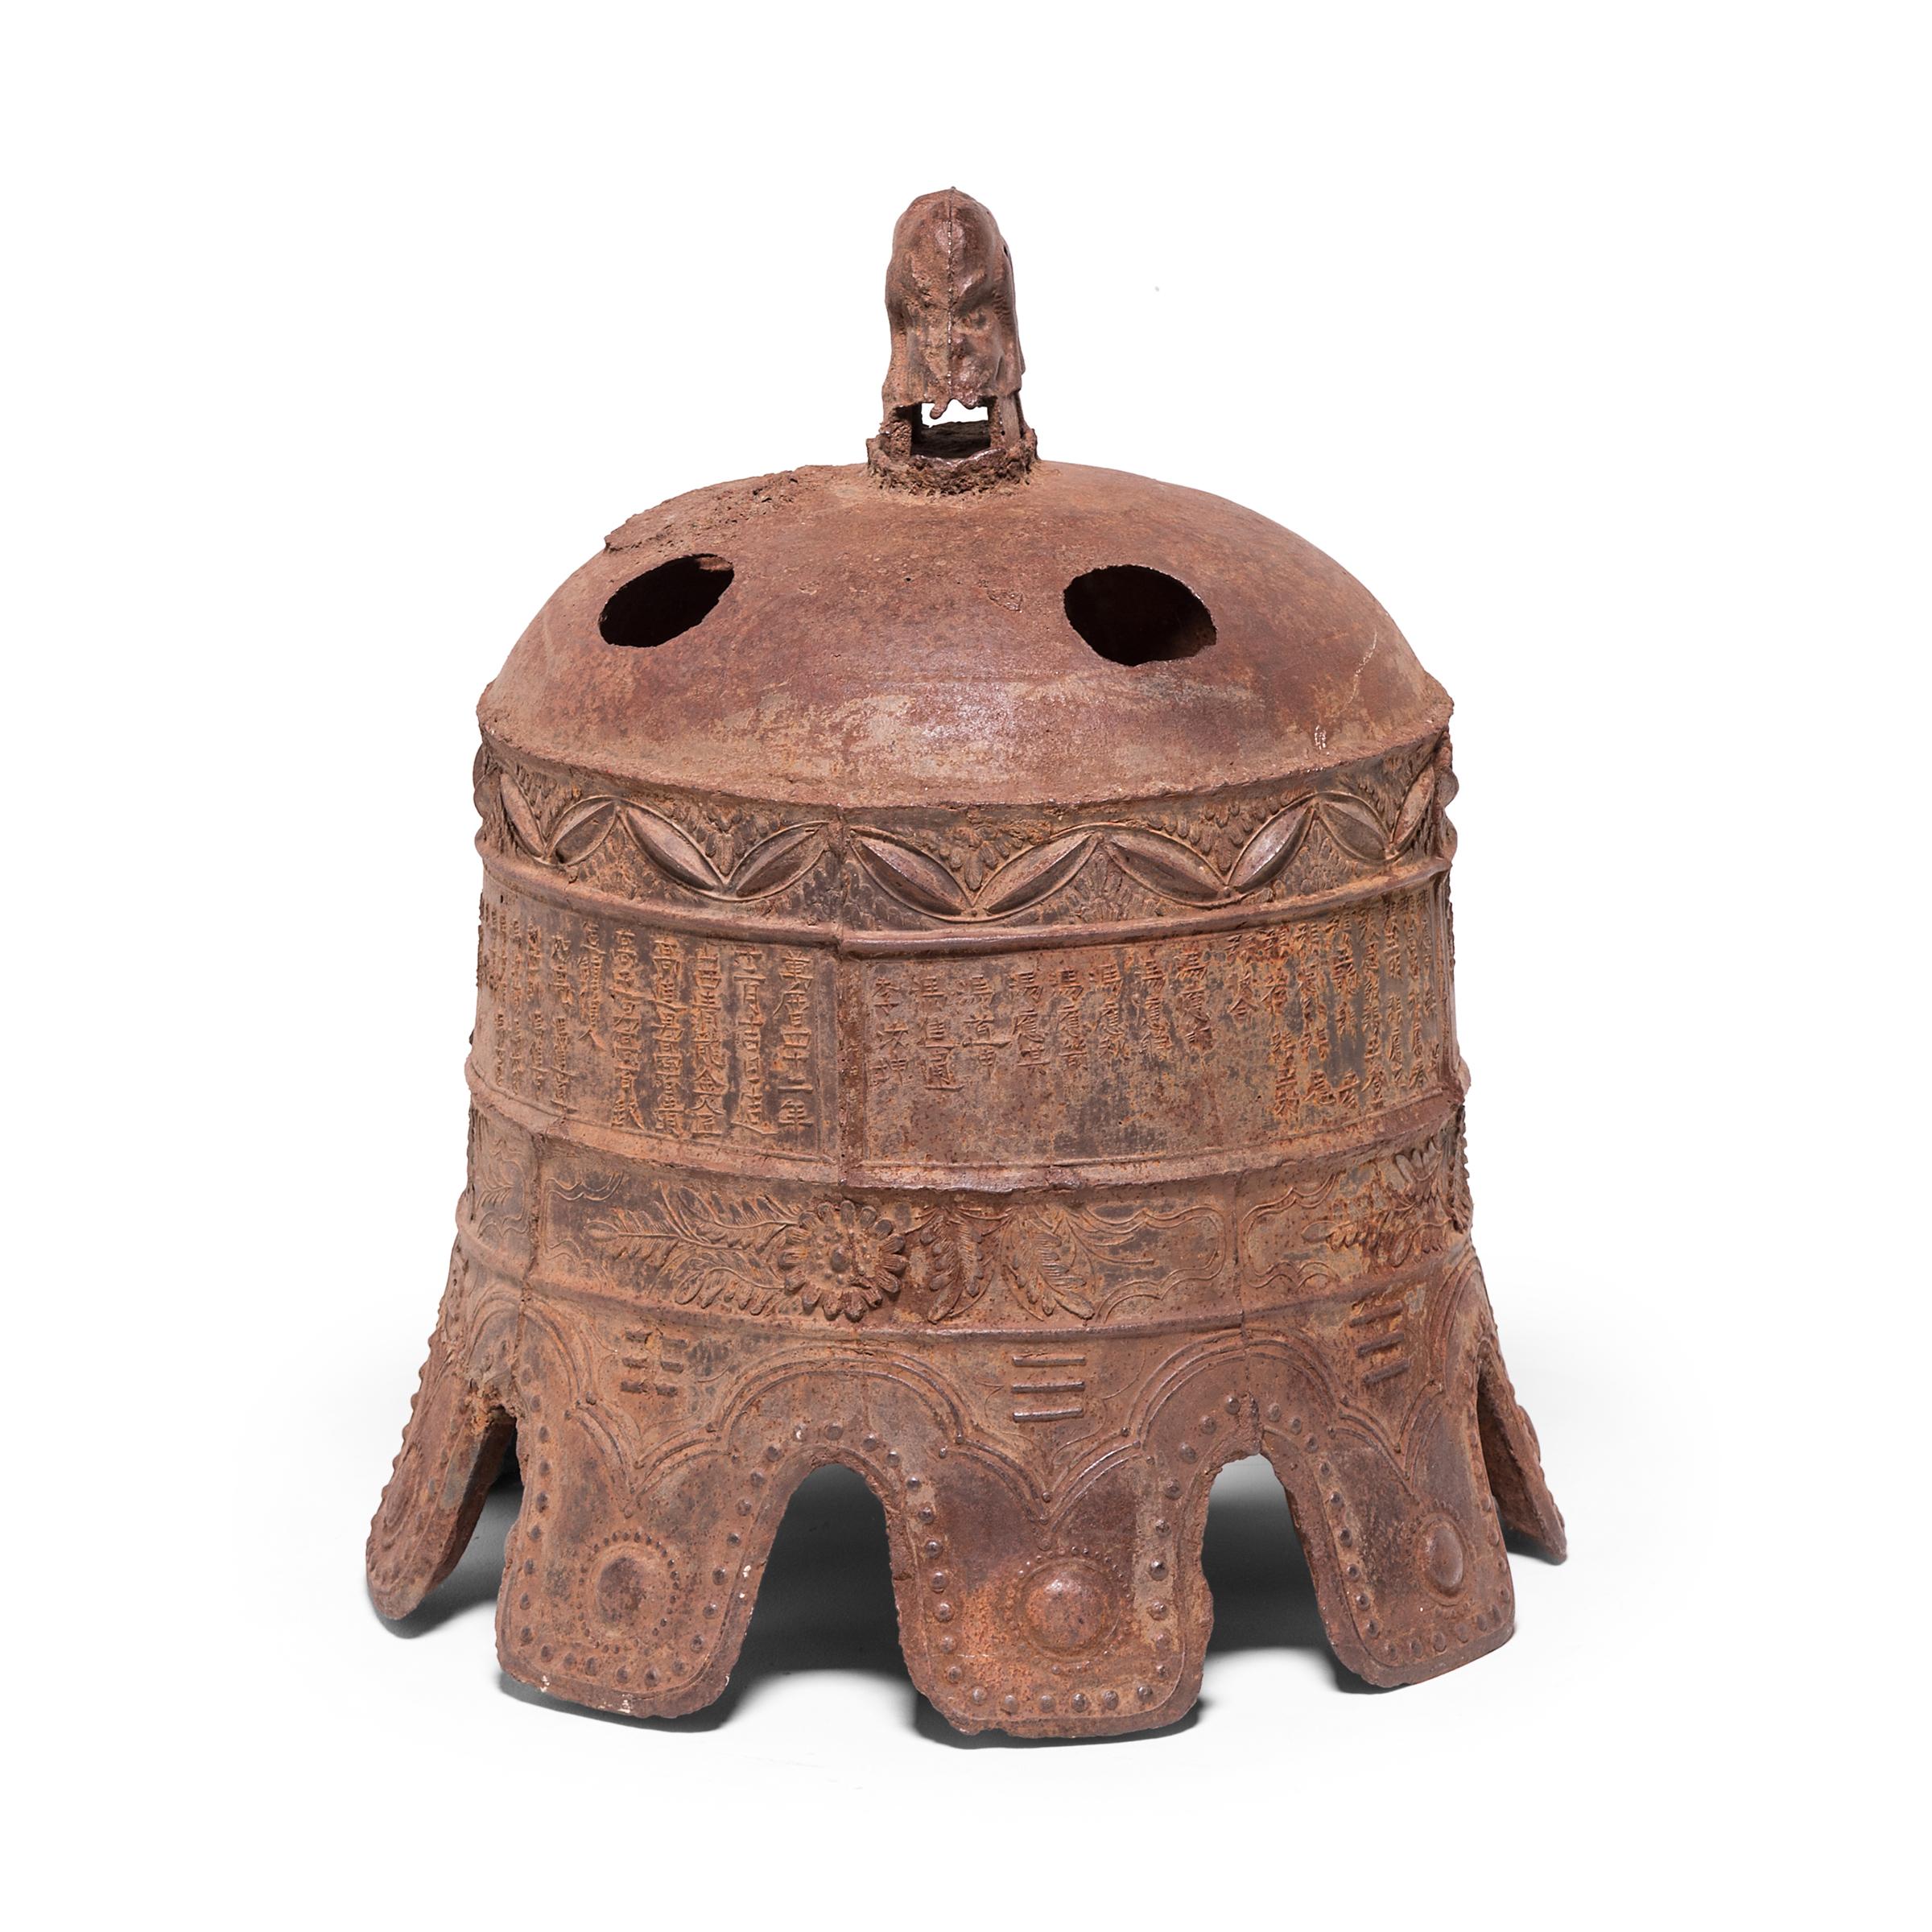 cast iron in ancient china